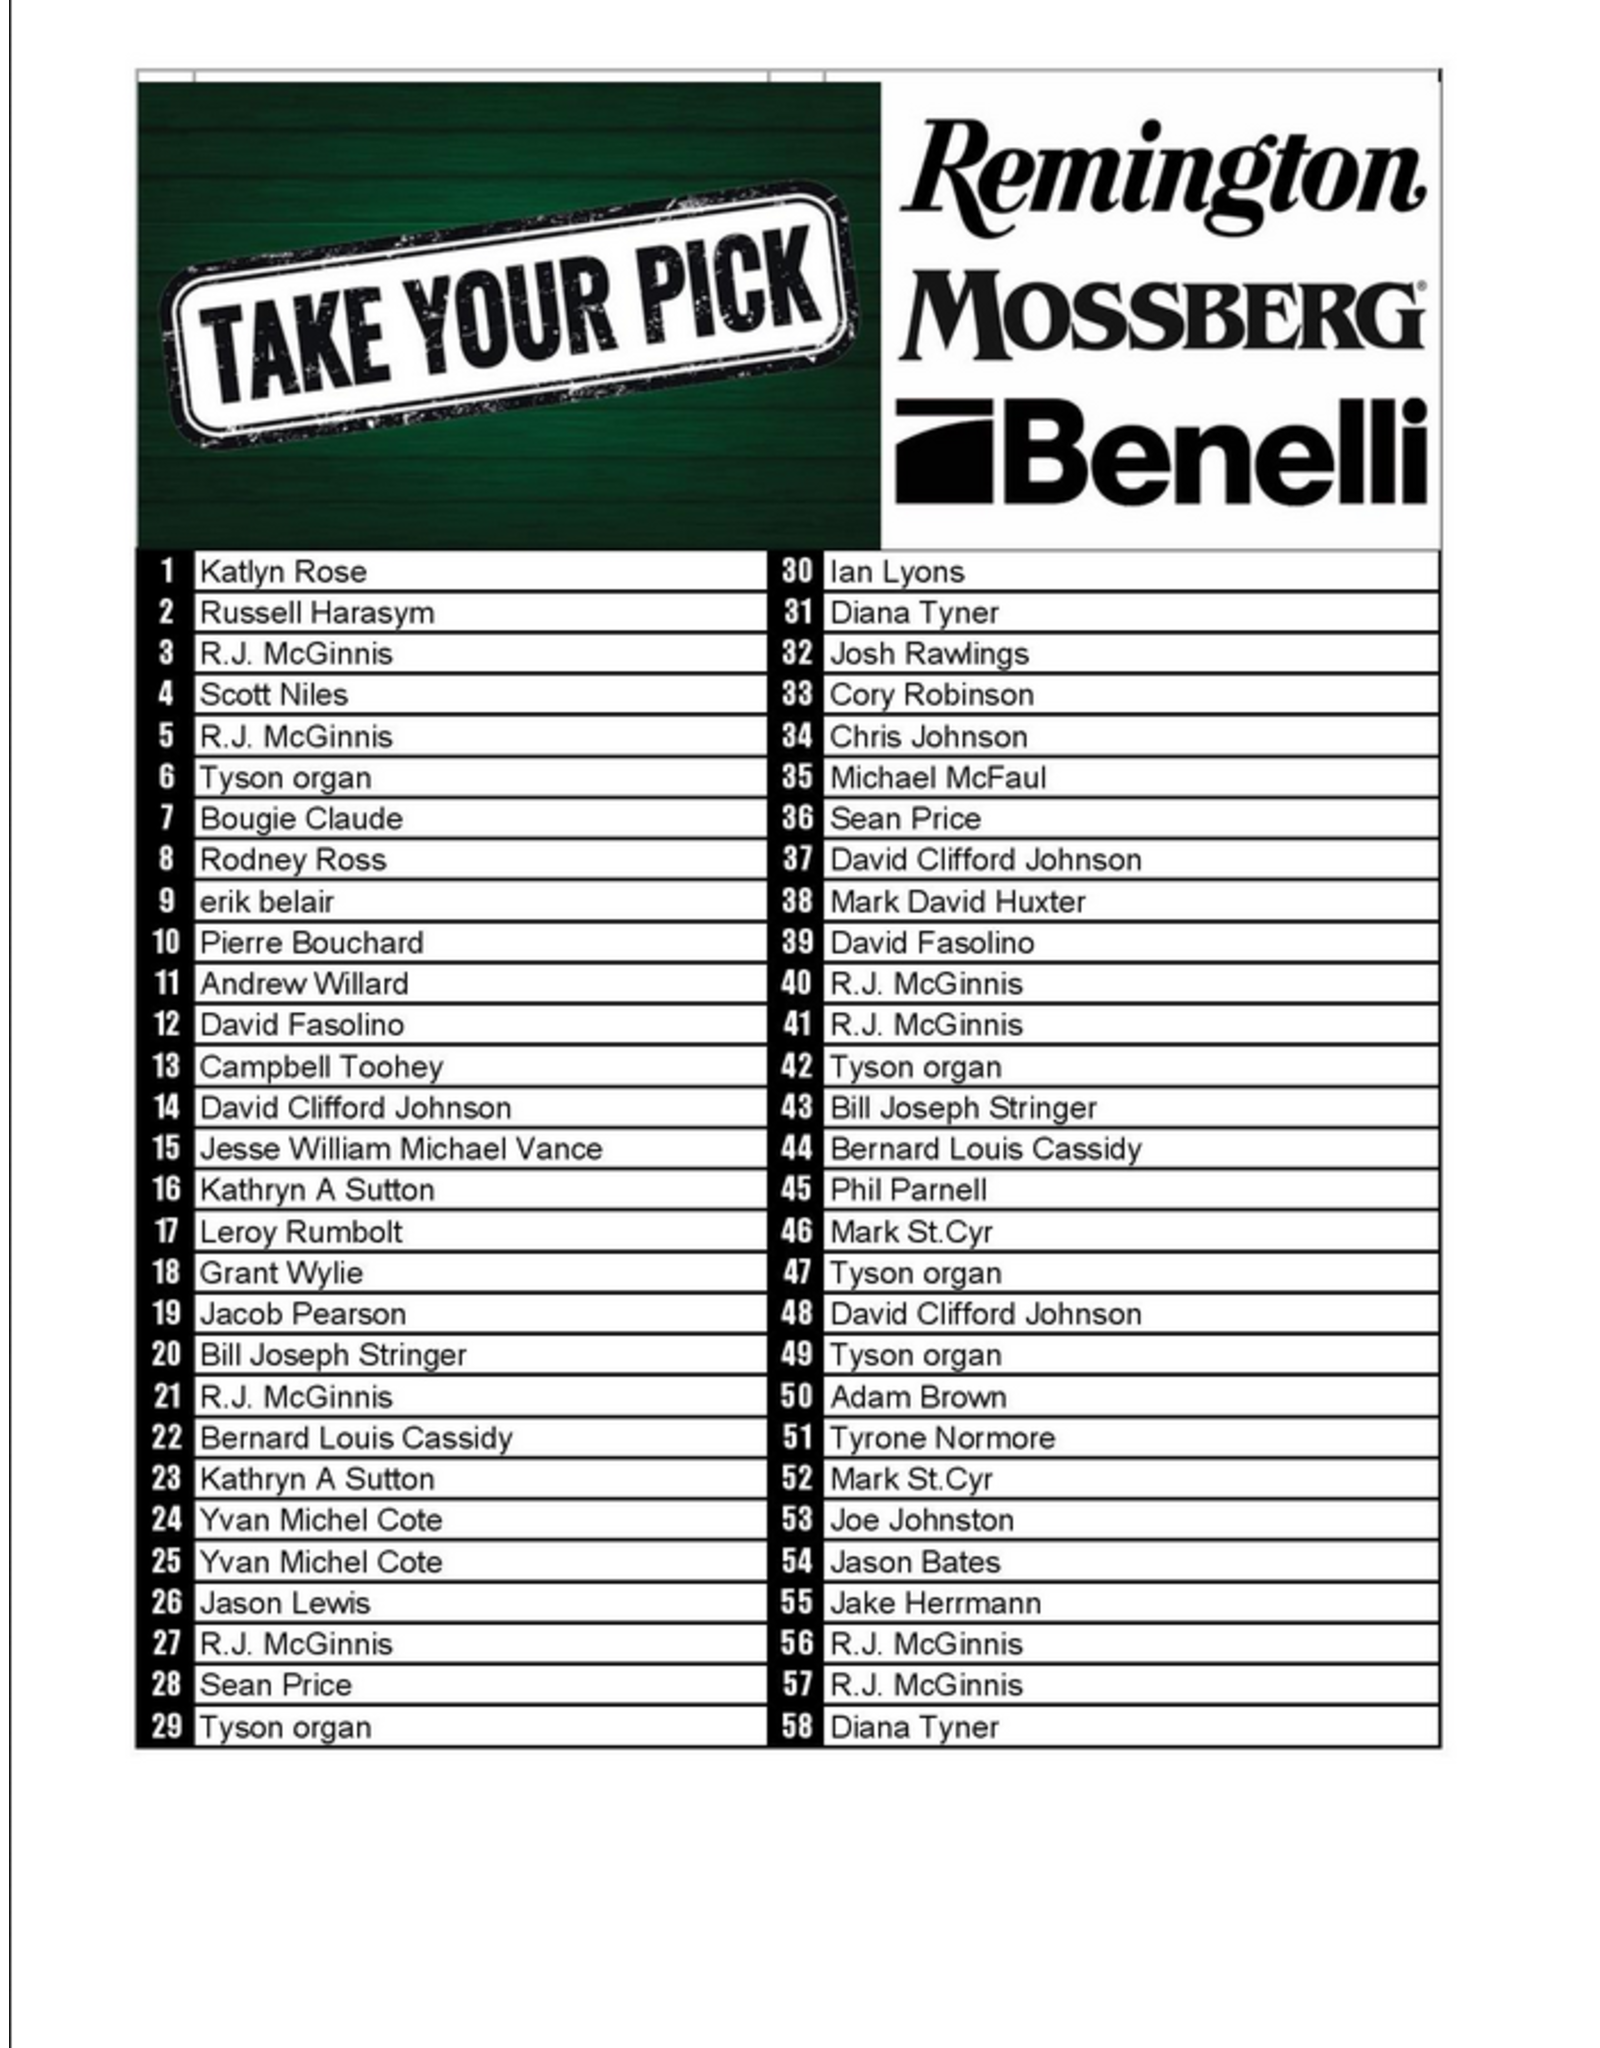 DRAW #1343 - Take Your Pick - Remington, Mossberg OR Benelli